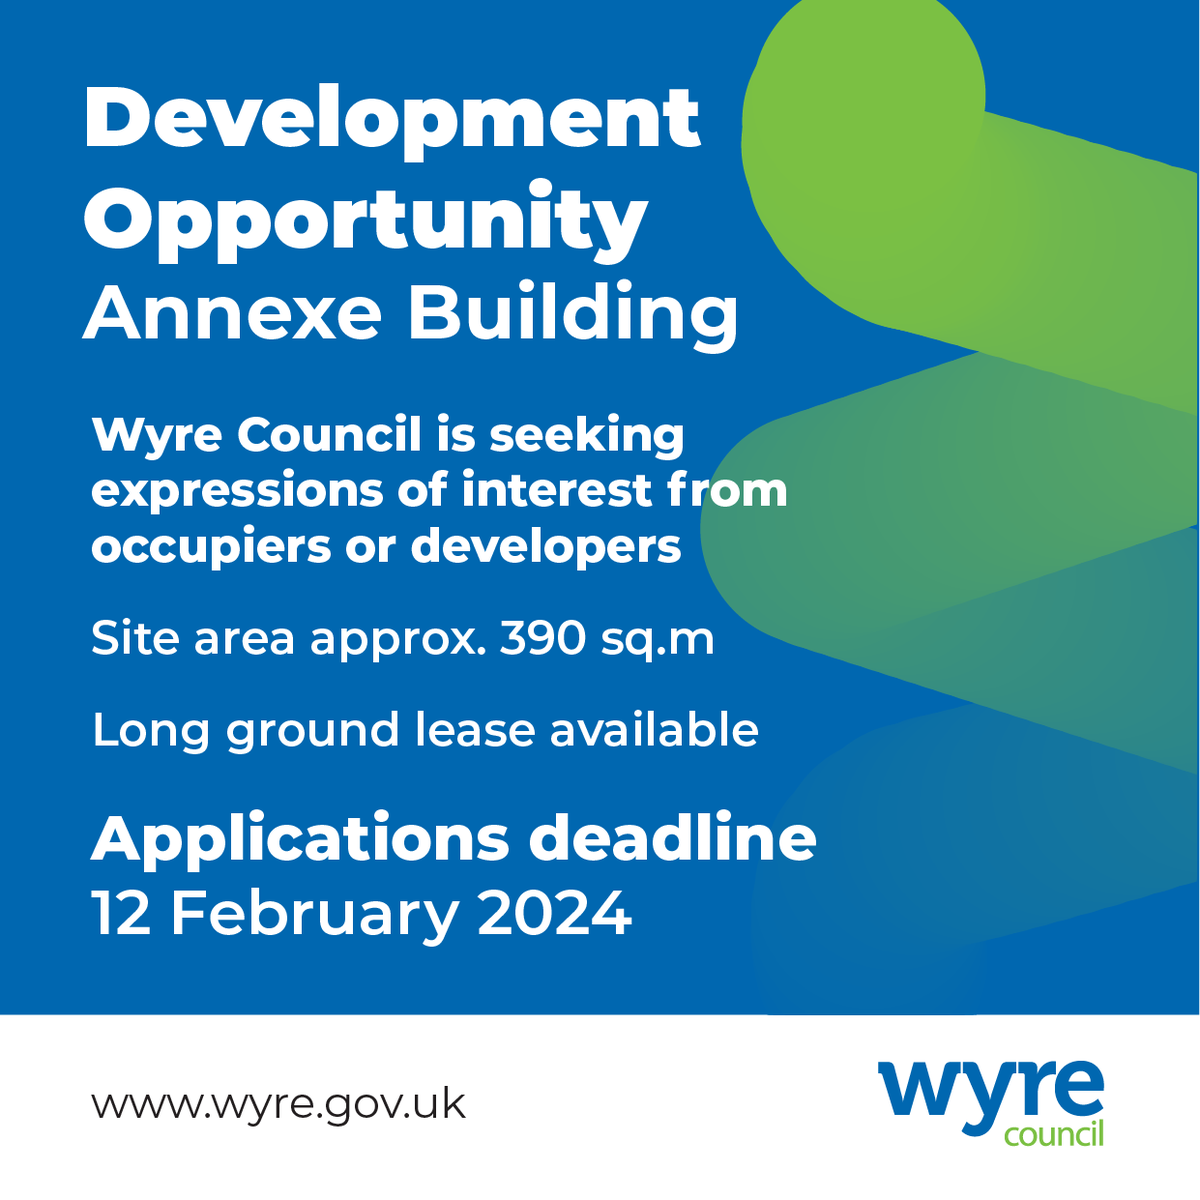 📢 Exciting opportunity for potential developers or owner occupiers for the single storey premises at the Civic Centre car park in Poulton we’re seeking expressions of interest from now until Monday 12 February. Learn more at wyre.gov.uk/EOI